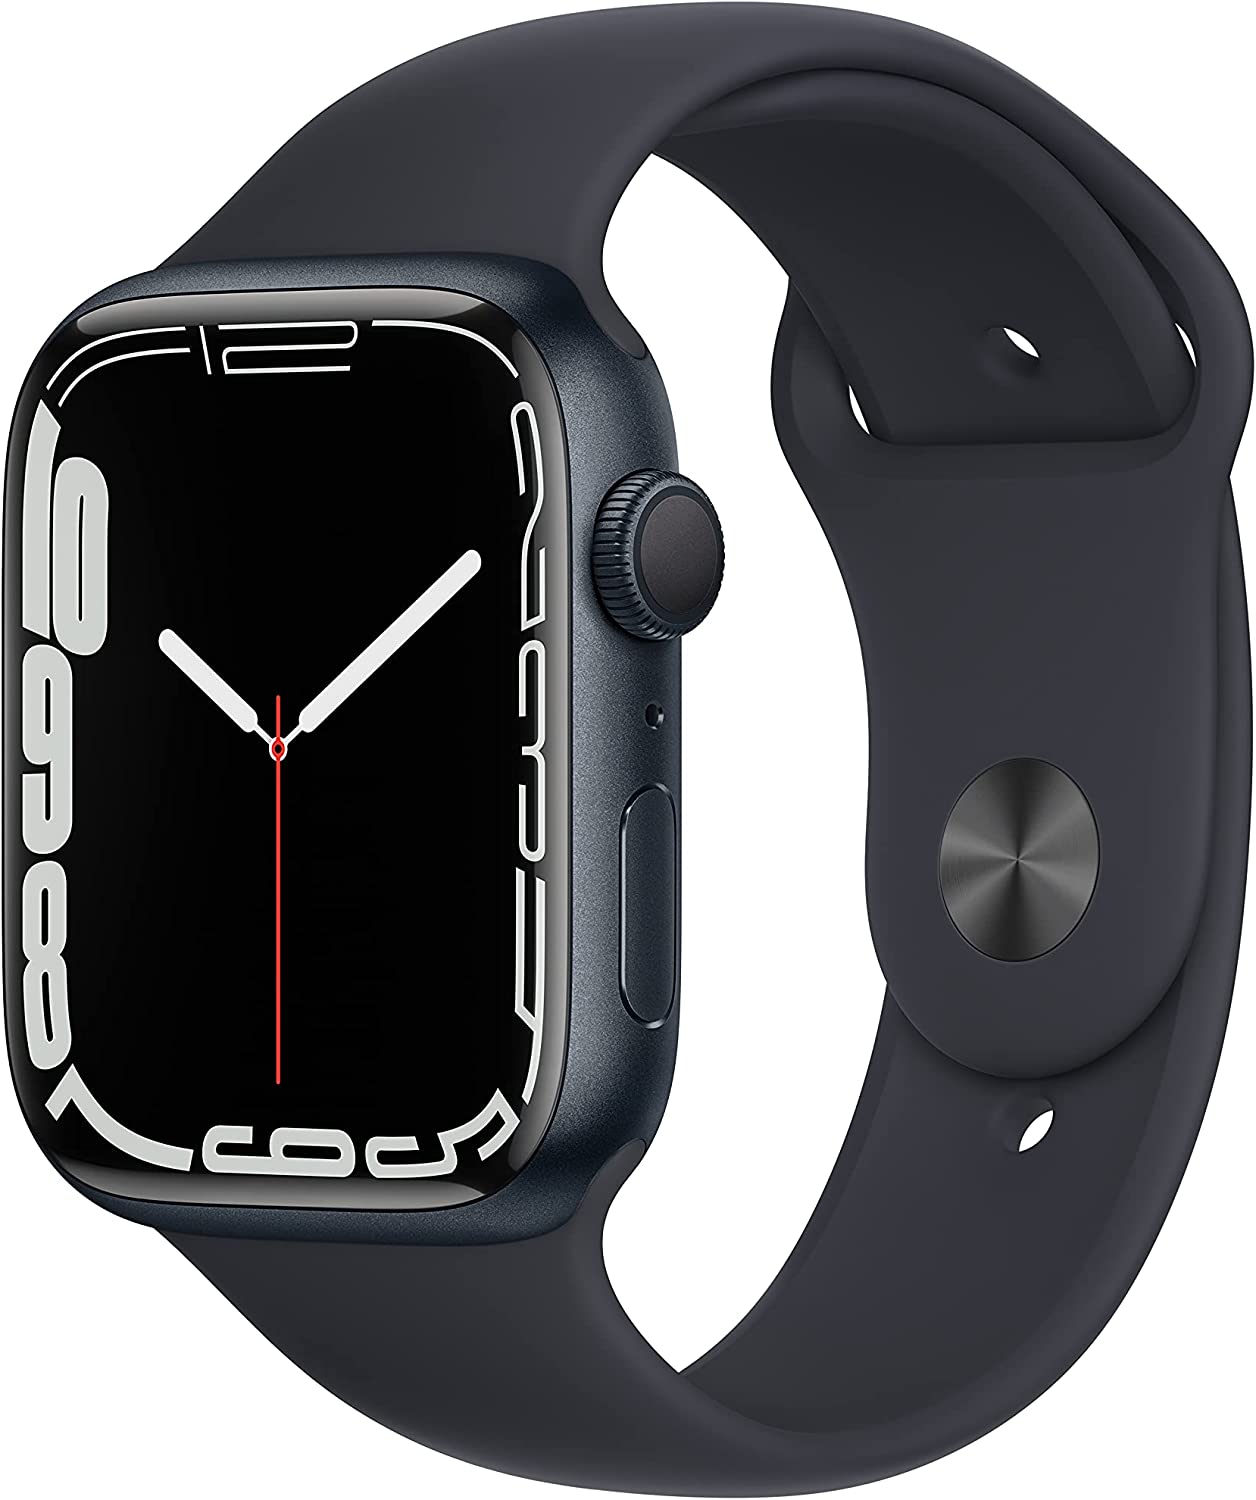 Apple Watch Series 7 45mm GPS w/ Aluminum Case (Various Colors) $379 + Free Shipping at Amazon & Walmart